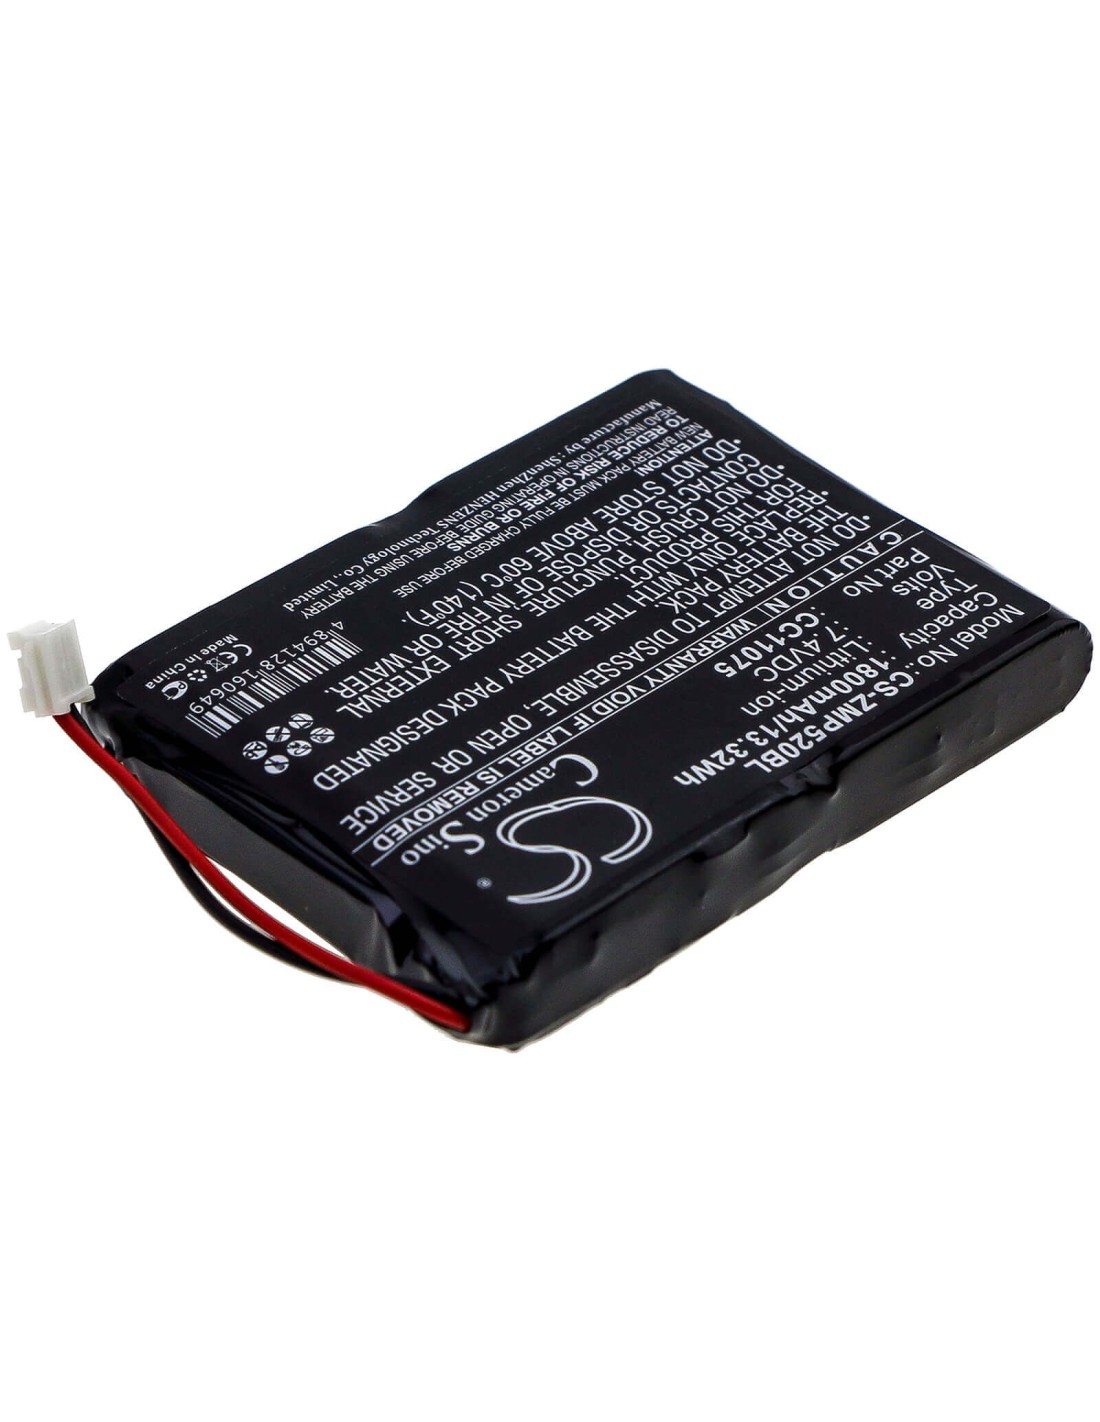 Battery for Monarch, Mp5020, Mp5022, Mp5030 7.4V, 1800mAh - 13.32Wh